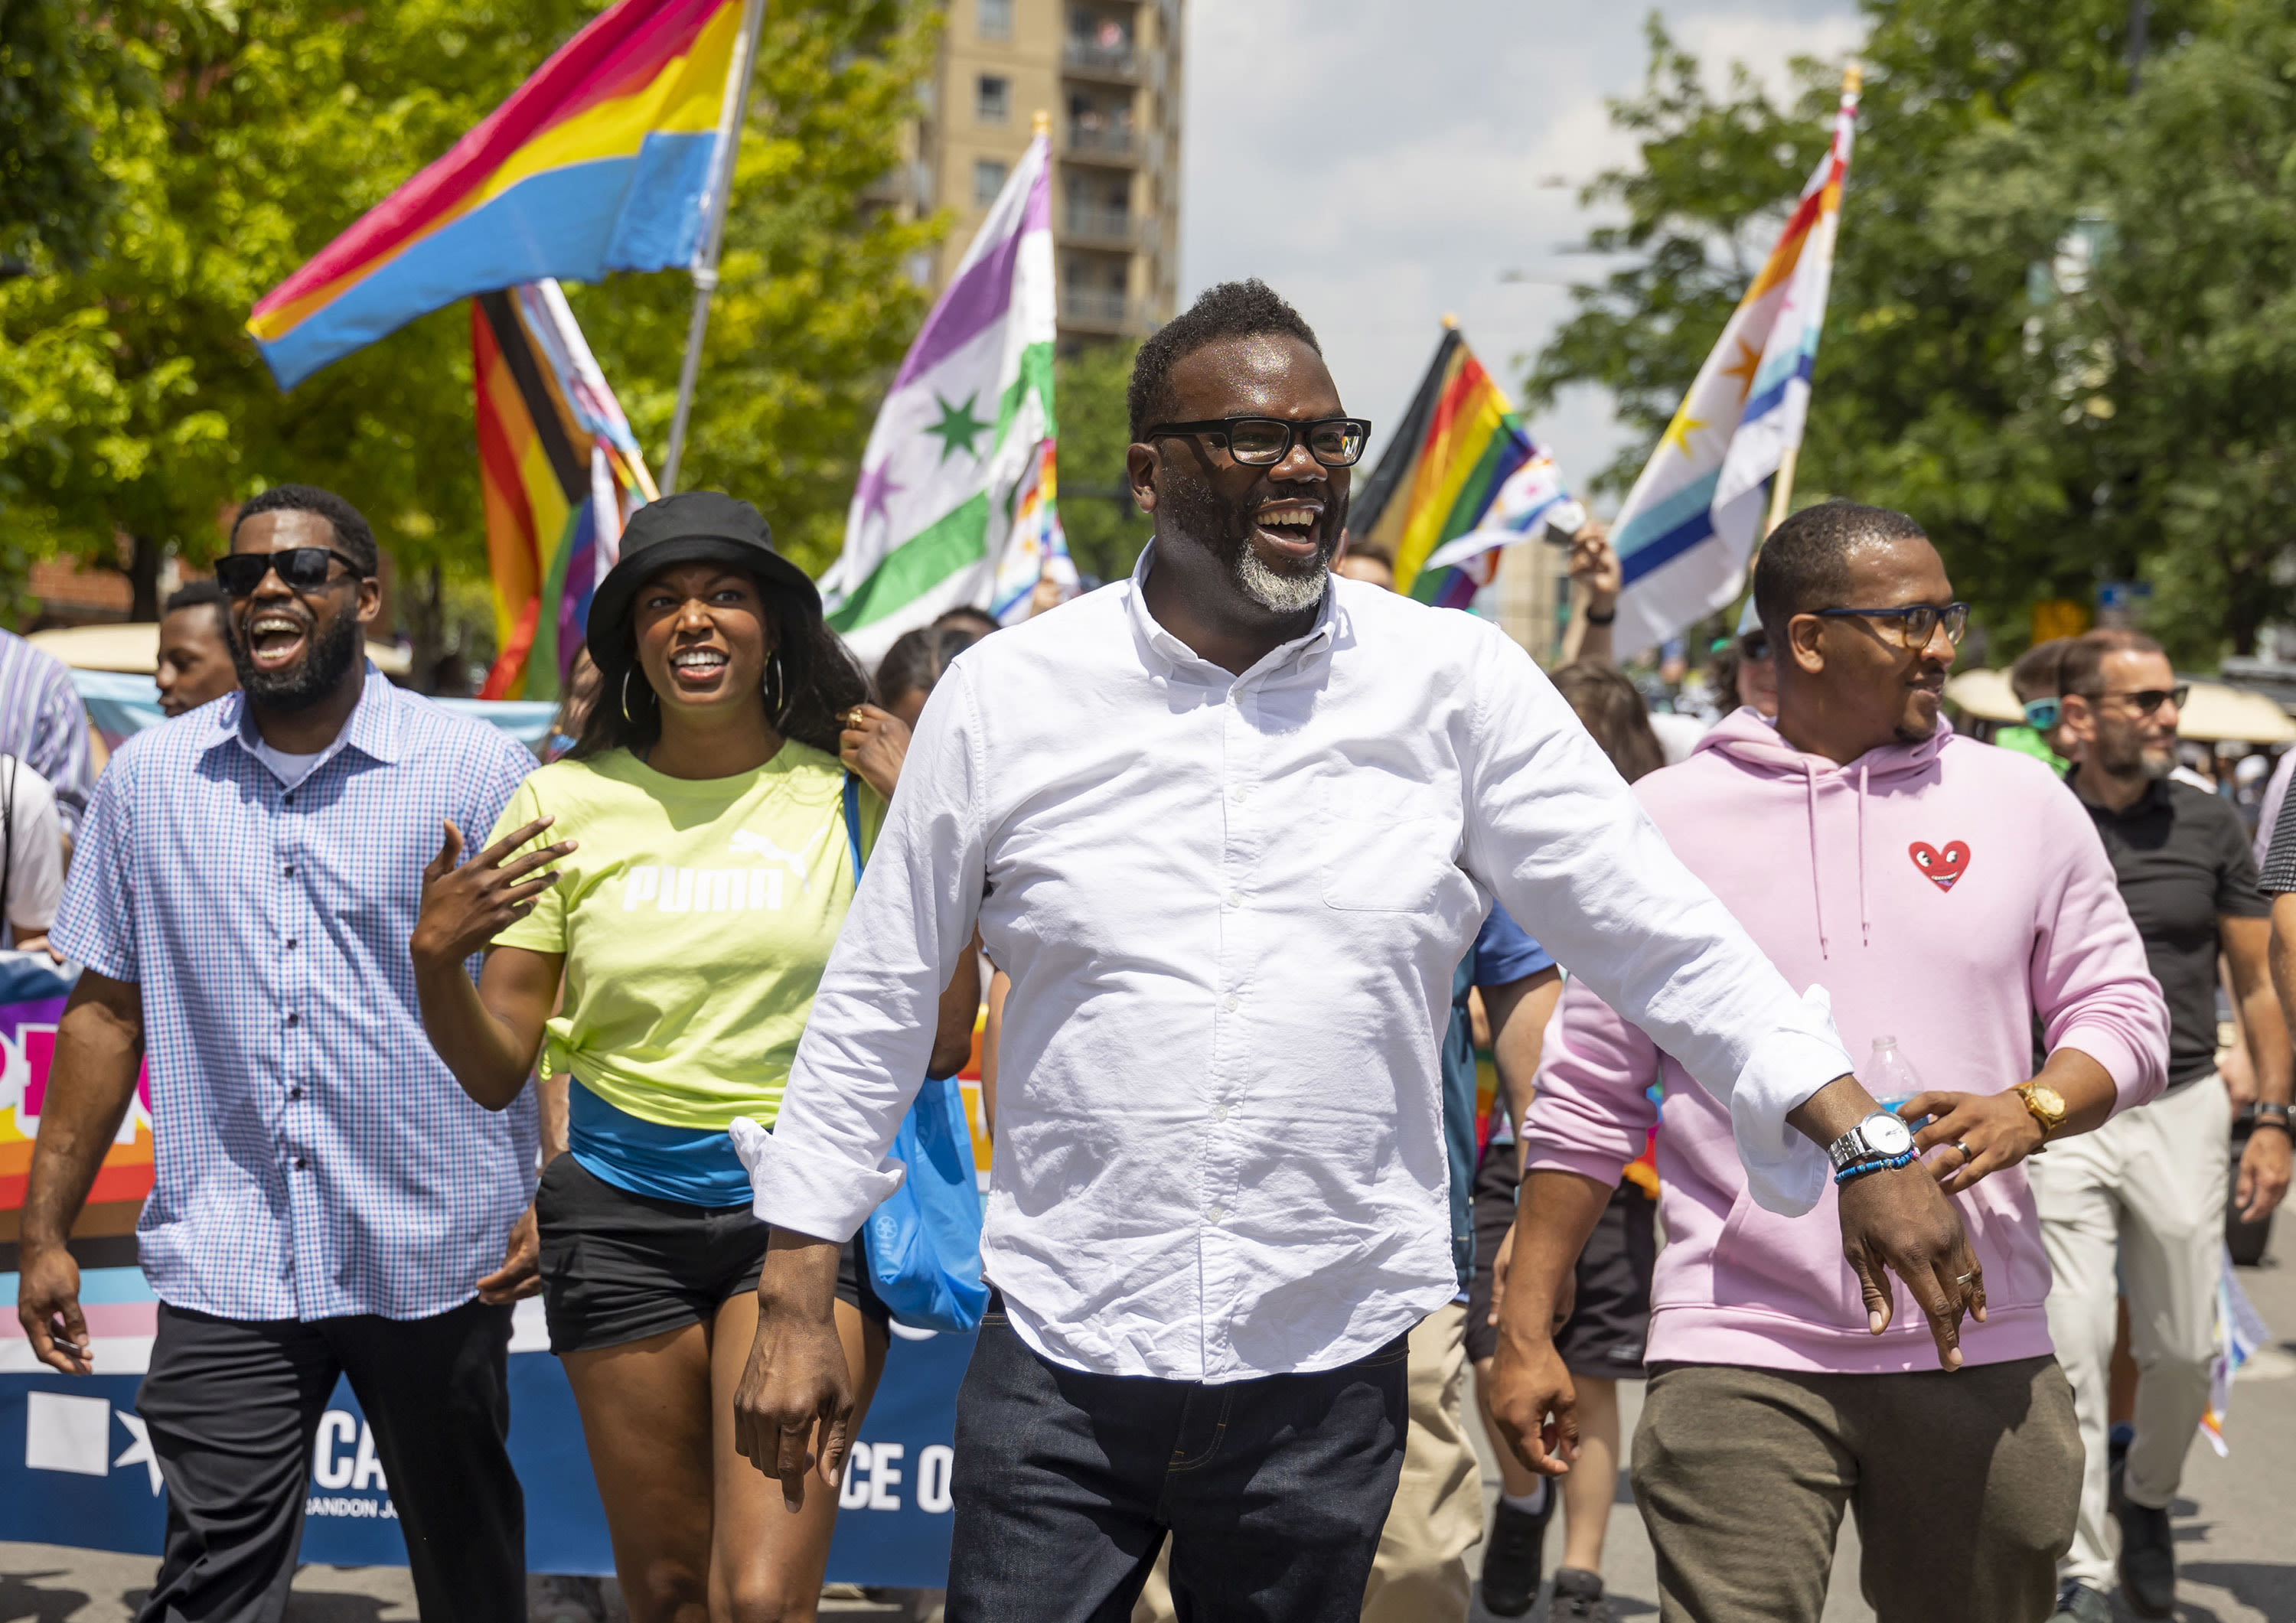 LGBTQ+ community members call on Mayor Brandon Johnson to rescind plan to scale back Chicago's Pride Parade